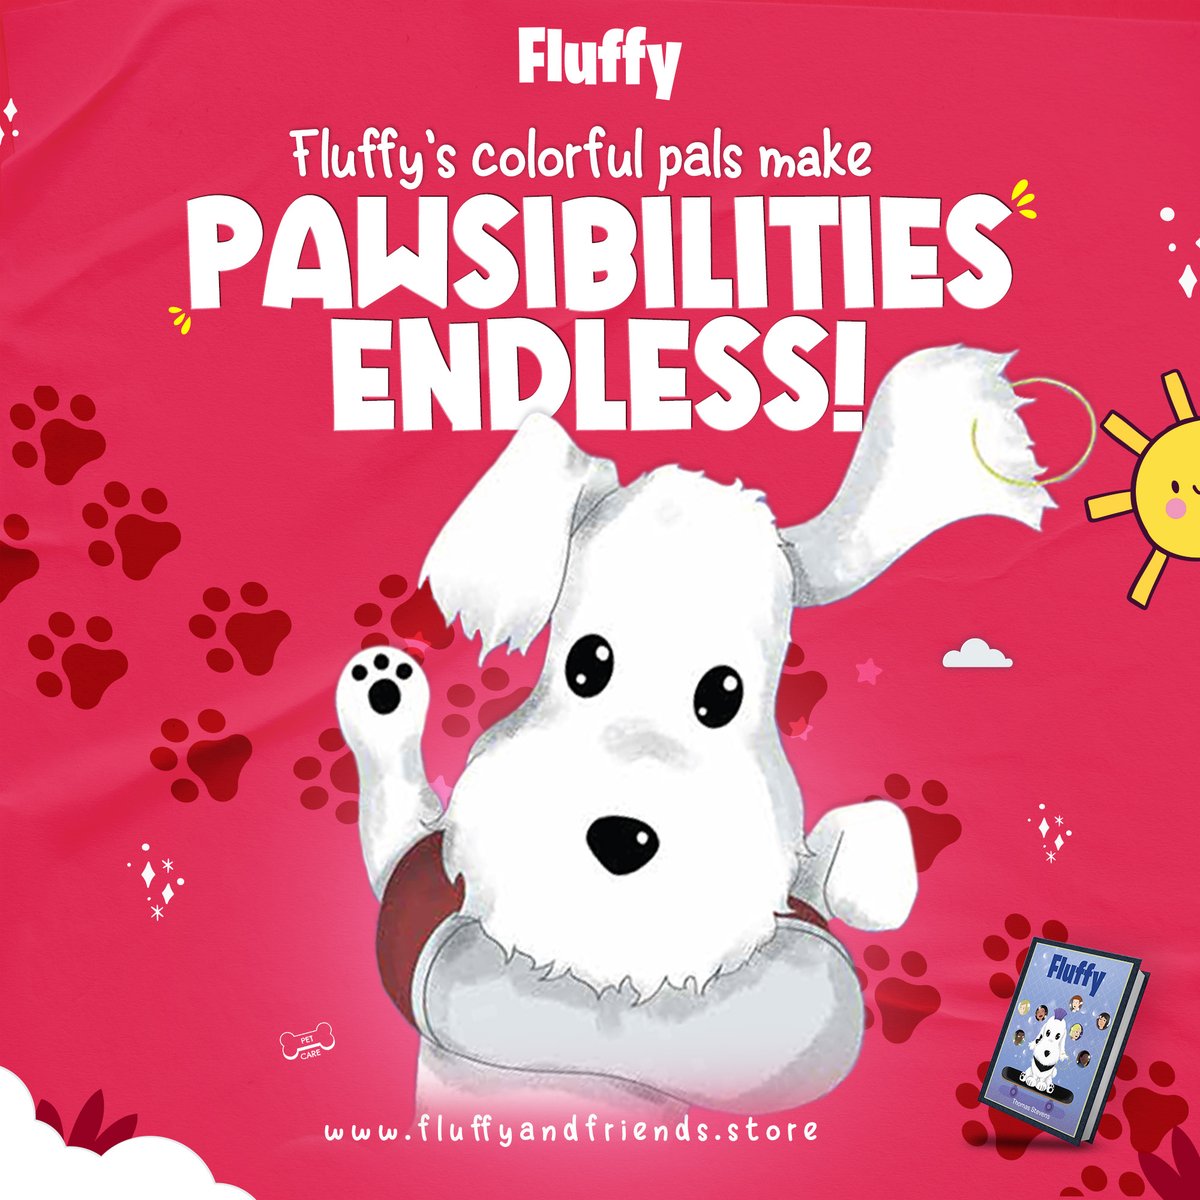 Pawsitively thrilling news, folks! Fluffy's vibrant buddies are here to fetch some tail-wagging adventures! amzn.com/1662454406/ #Fluffy #FluffyAndFriends #stopracism #endracism #friendshipgoals #friendships #dog #dogs #dogstagram #doglover #books #childrenbooks